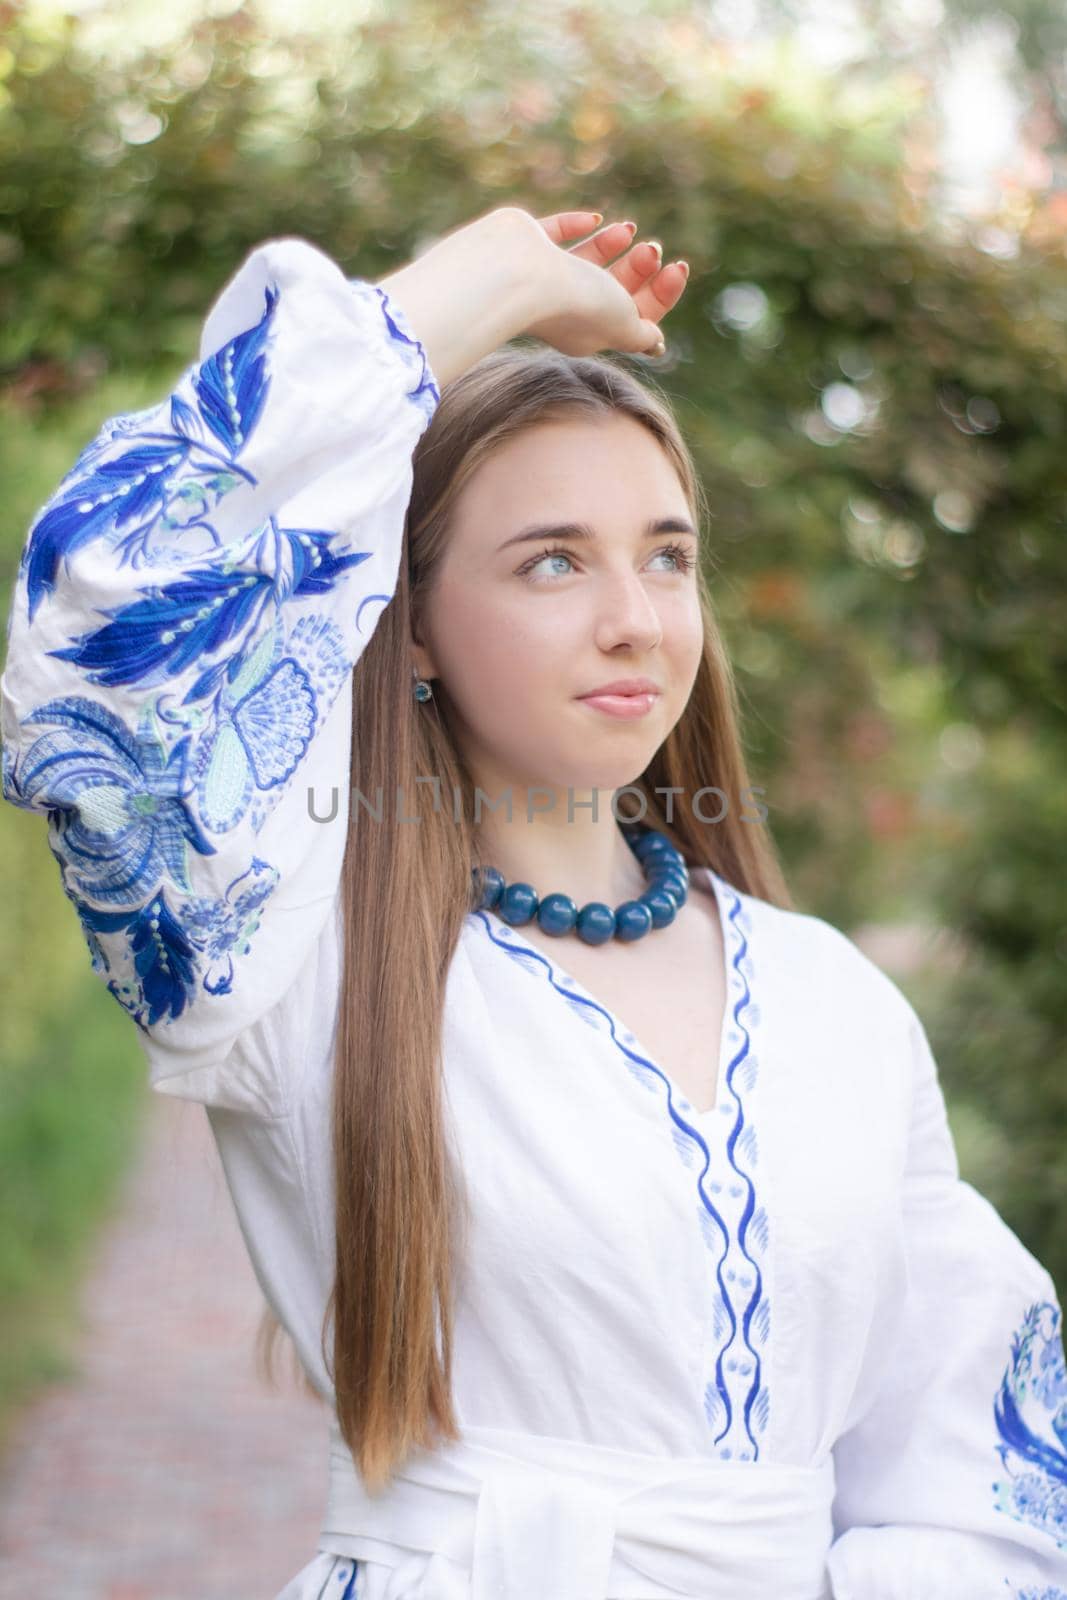 ukrainian blonde girl in national blue dress - embroidered shirt. young woman patriot. outdoors photo of charming female by oliavesna